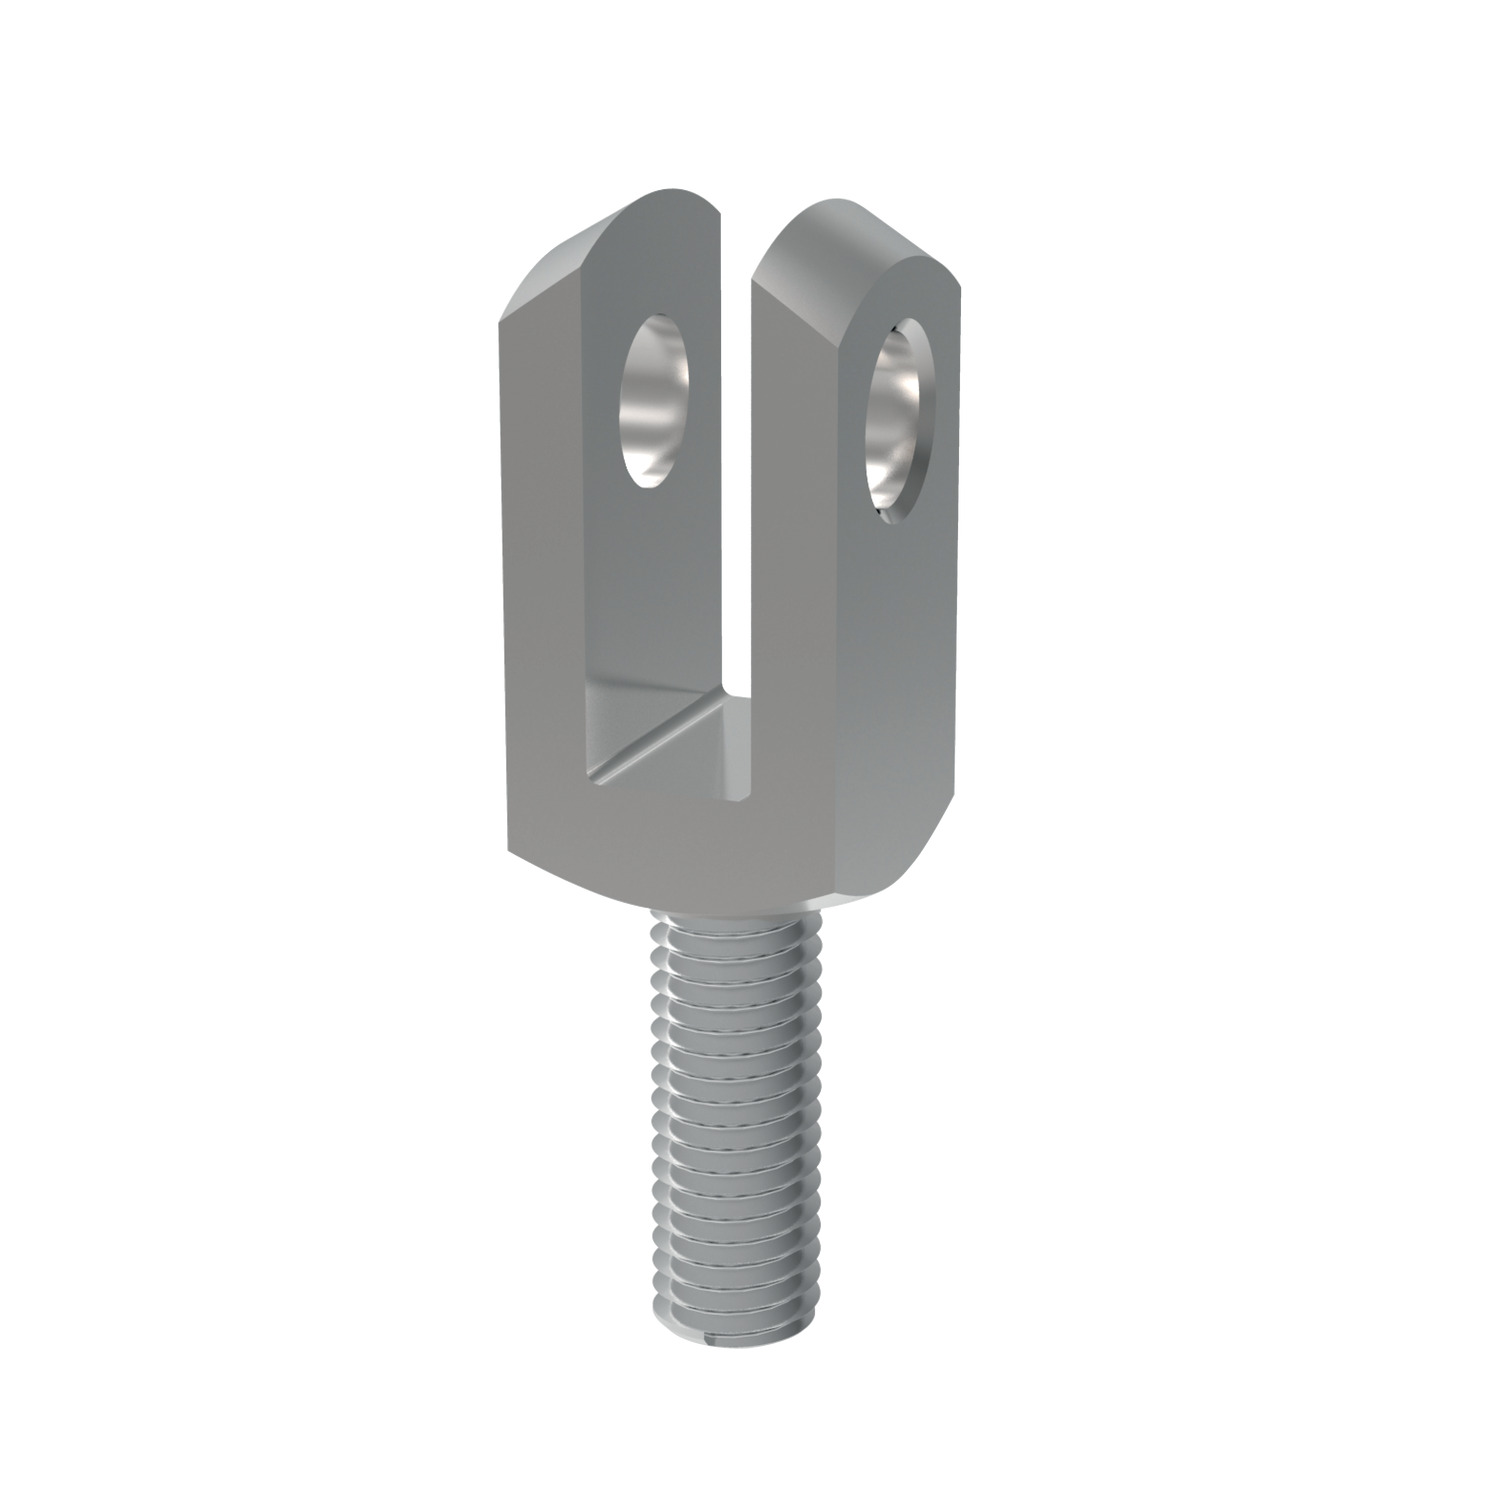 Product 65640, Male Clevis Joints silver zinc plated / 